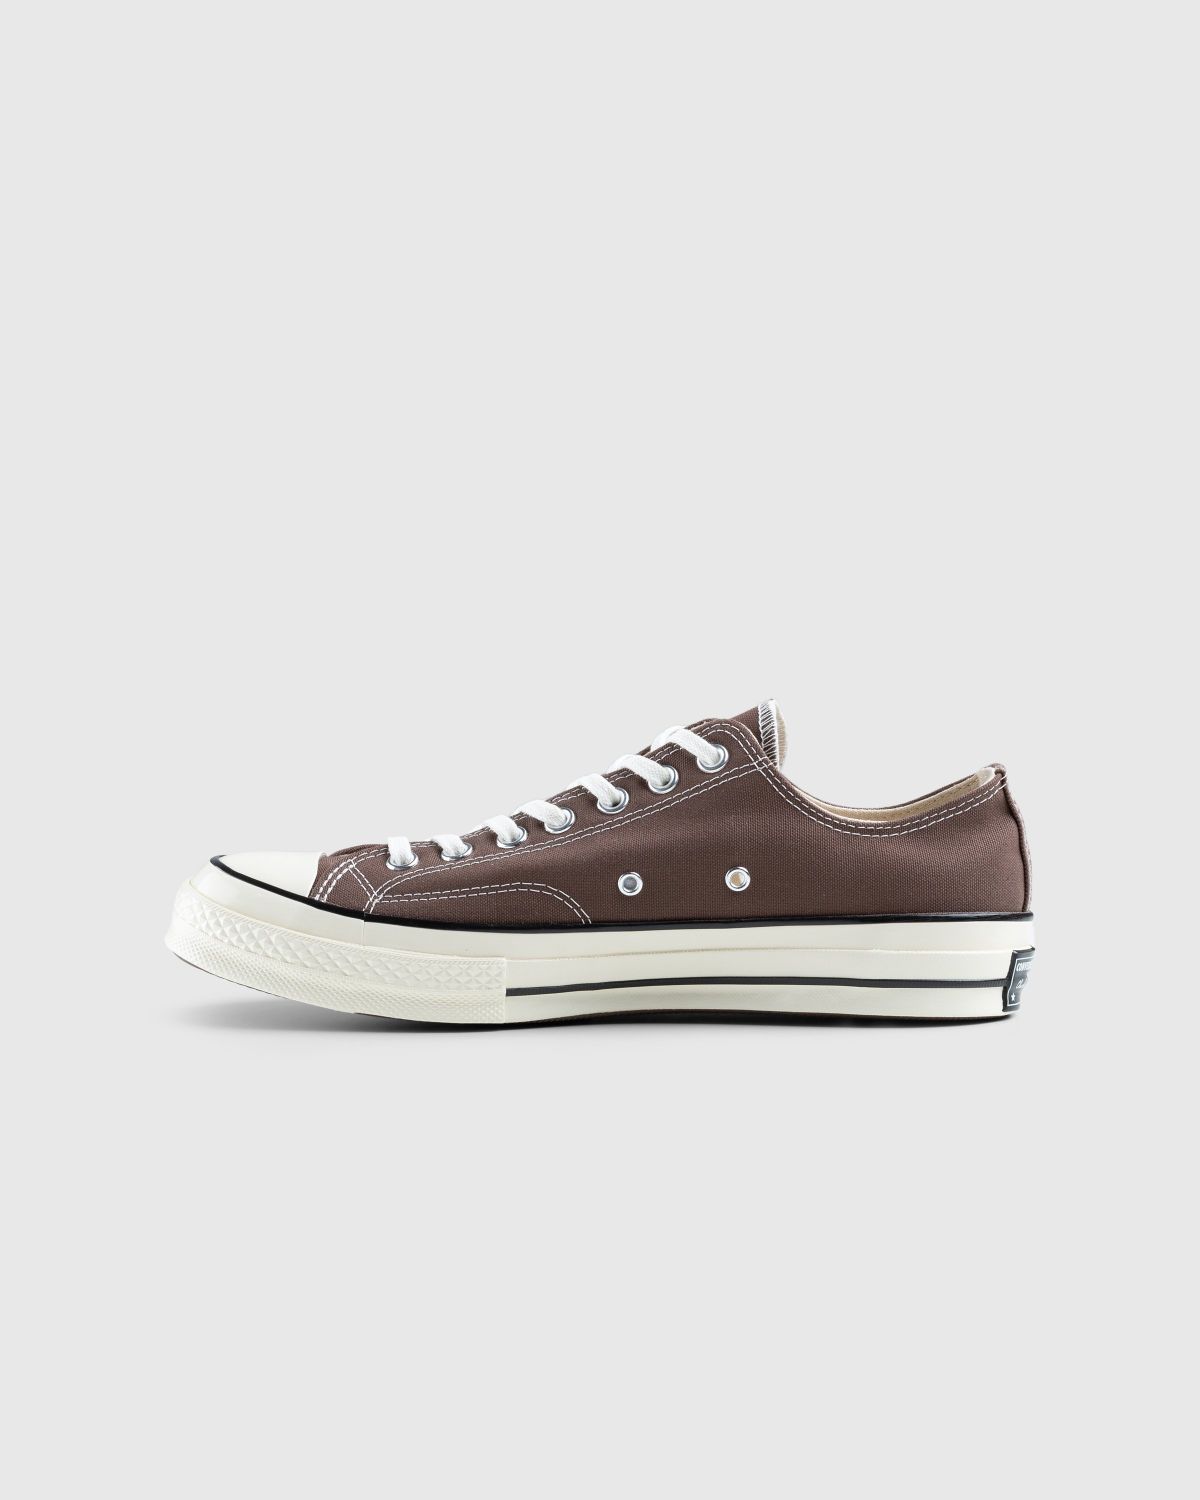 Converse – Chuck 70 Ox Squirrel Friend/Egret/Black - Low Top Sneakers - Brown - Image 2